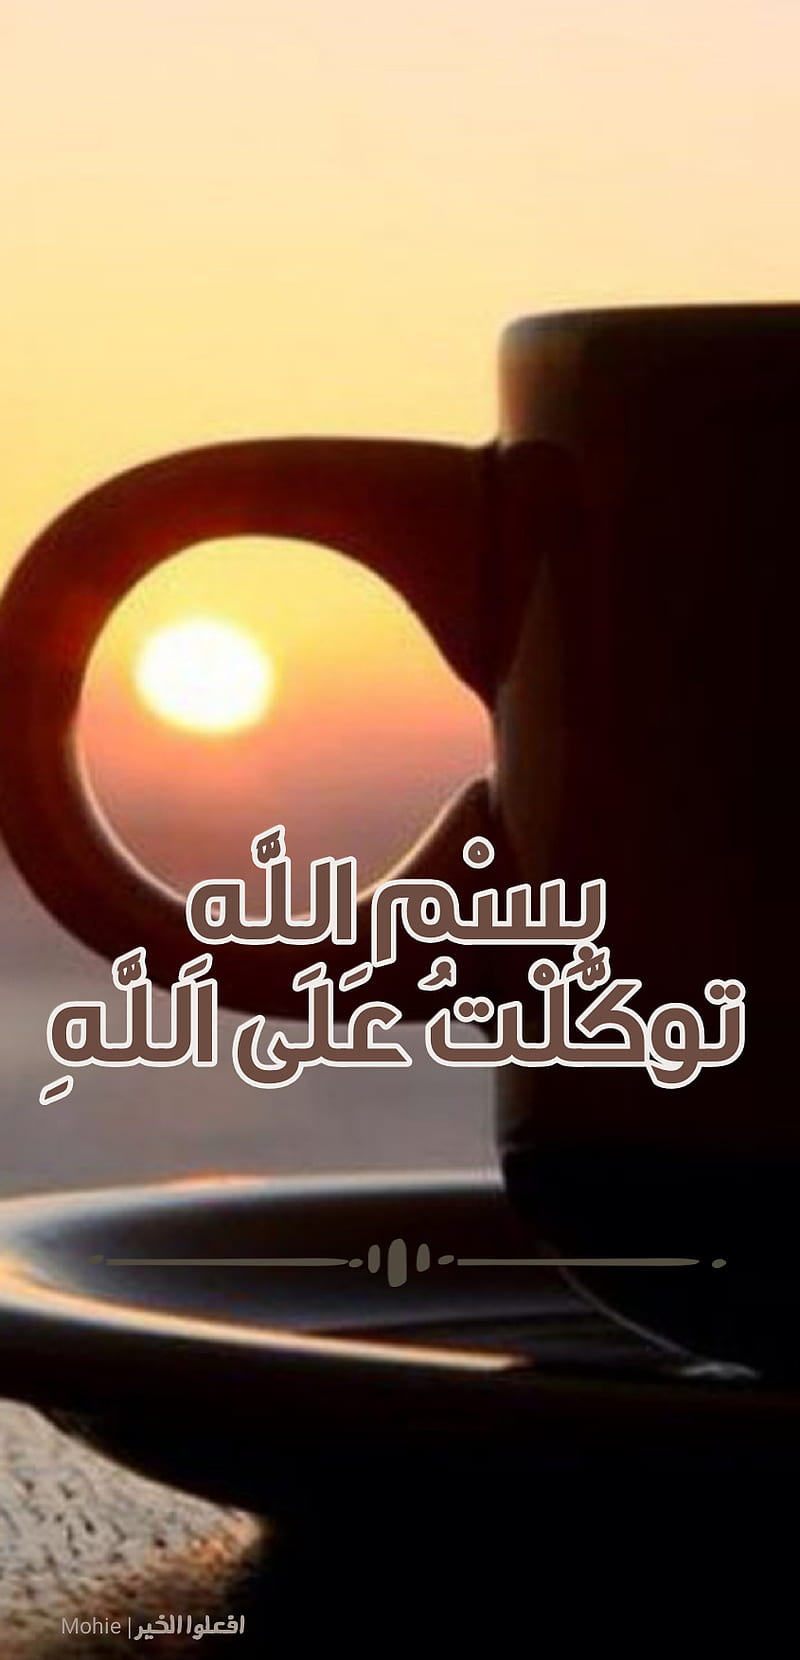 Islamic Good Morning Images in English